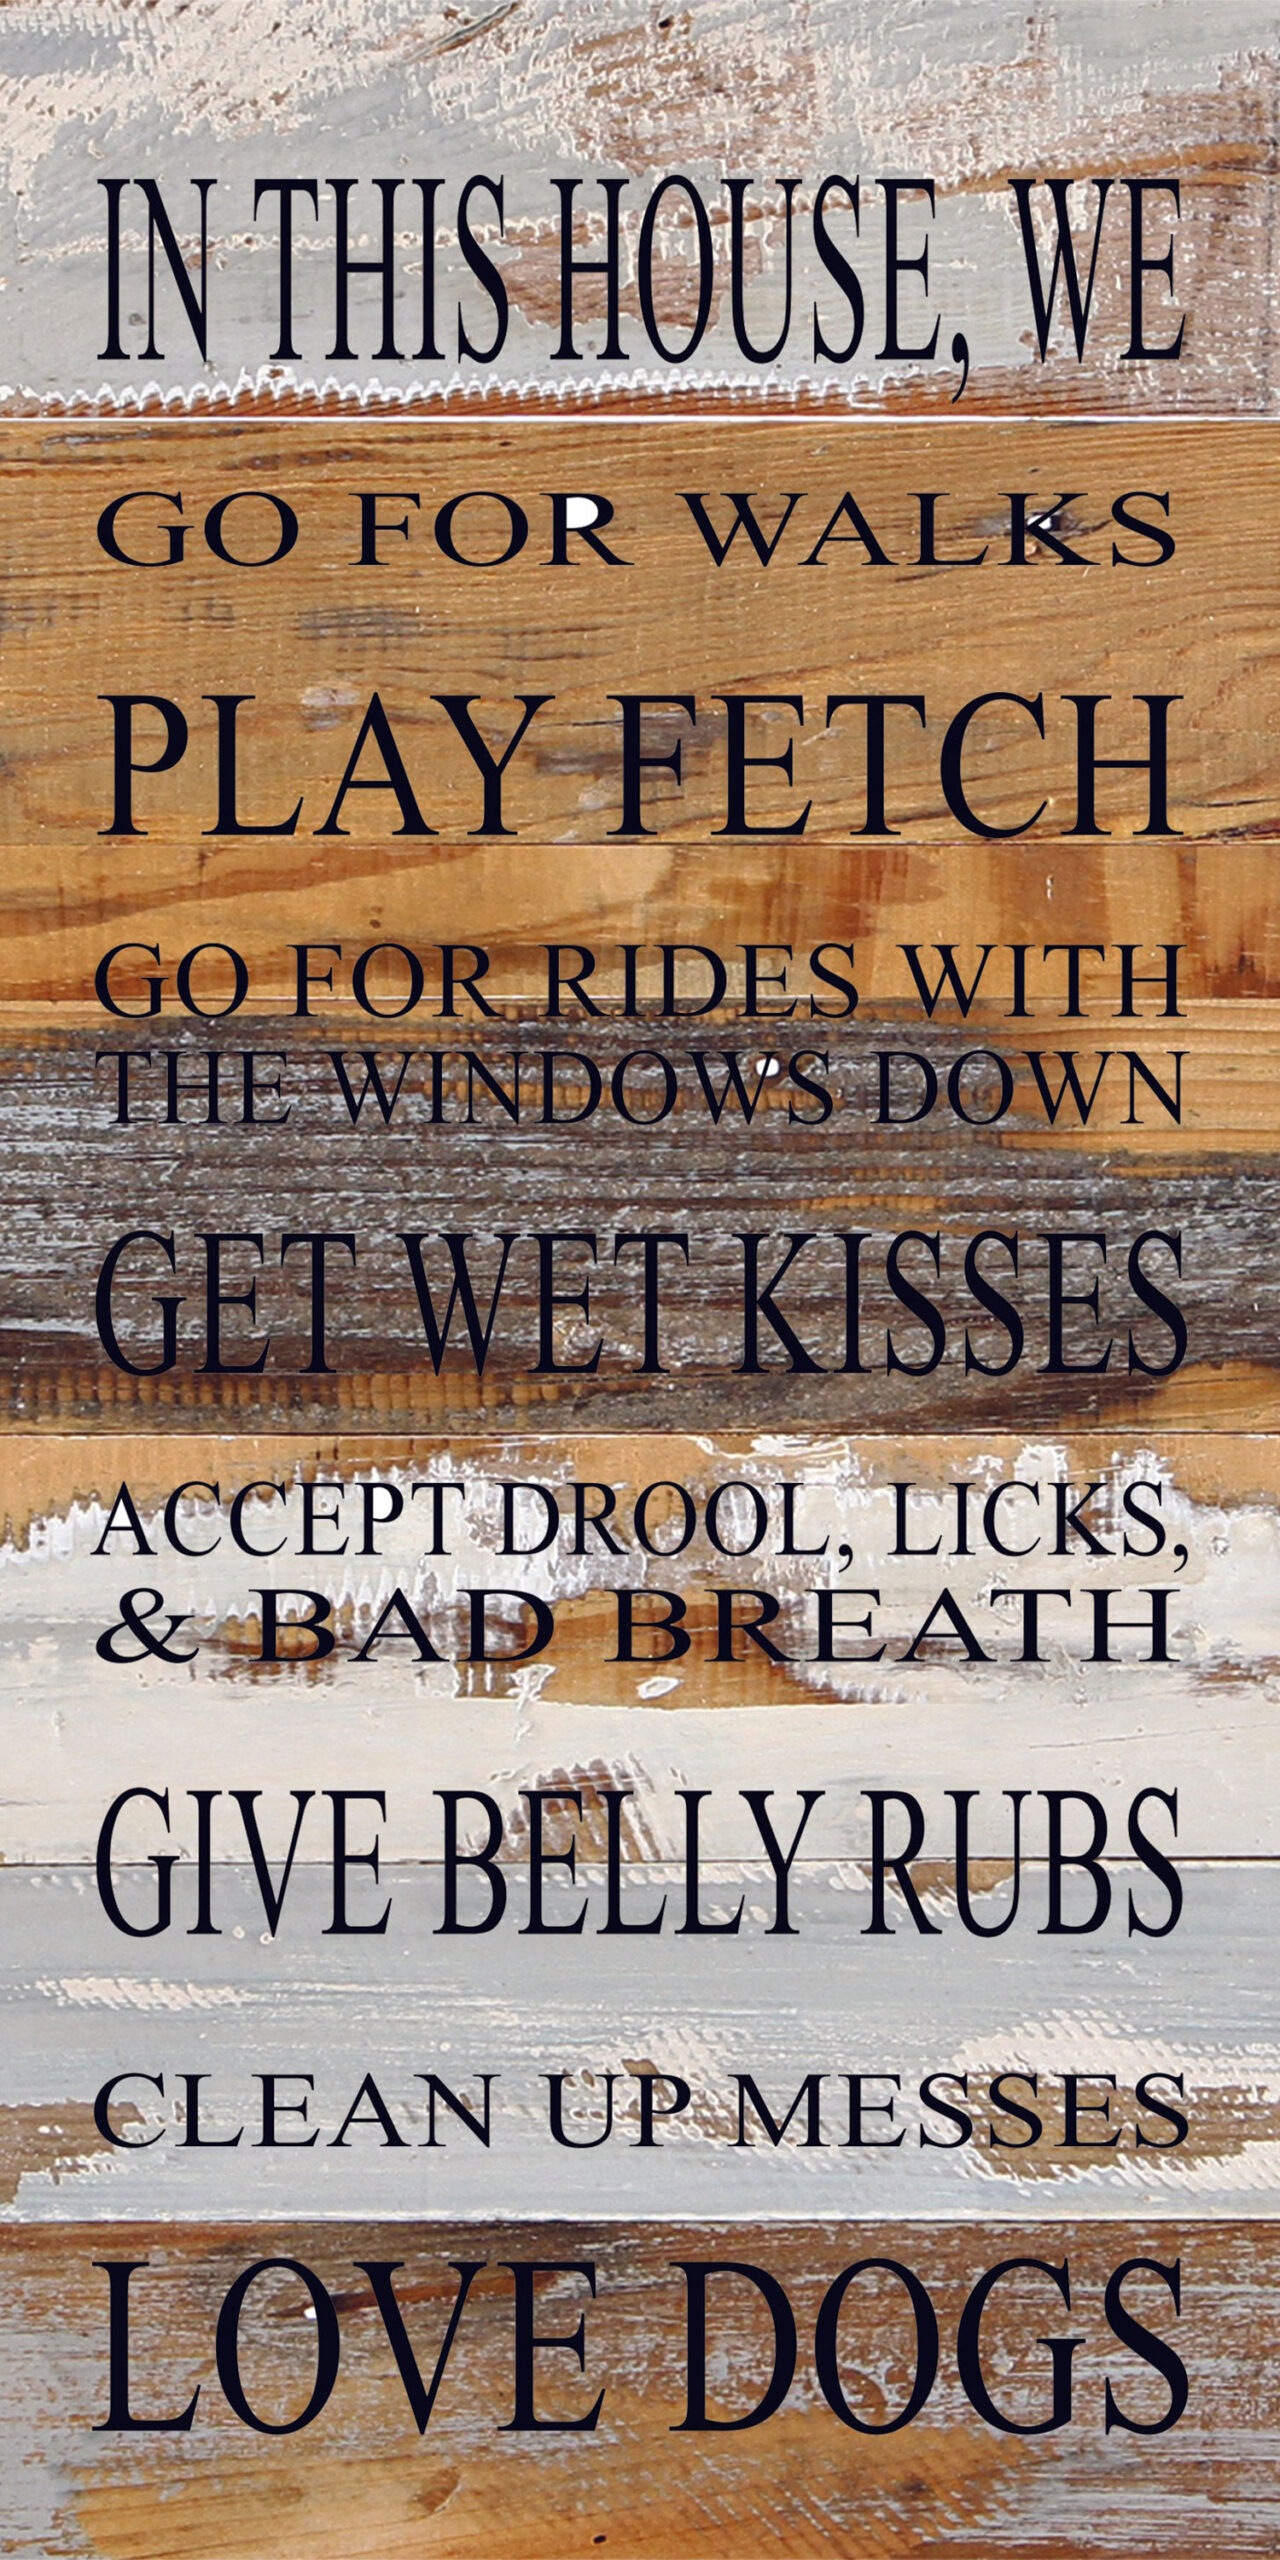 In this house, we go for walks, play fetch, go for rides with the windows down, get wet kisses, accept drool licks & bad breath, give belly rubs, clean up messes, love dogs. / 12"x24" Reclaimed Wood Sign